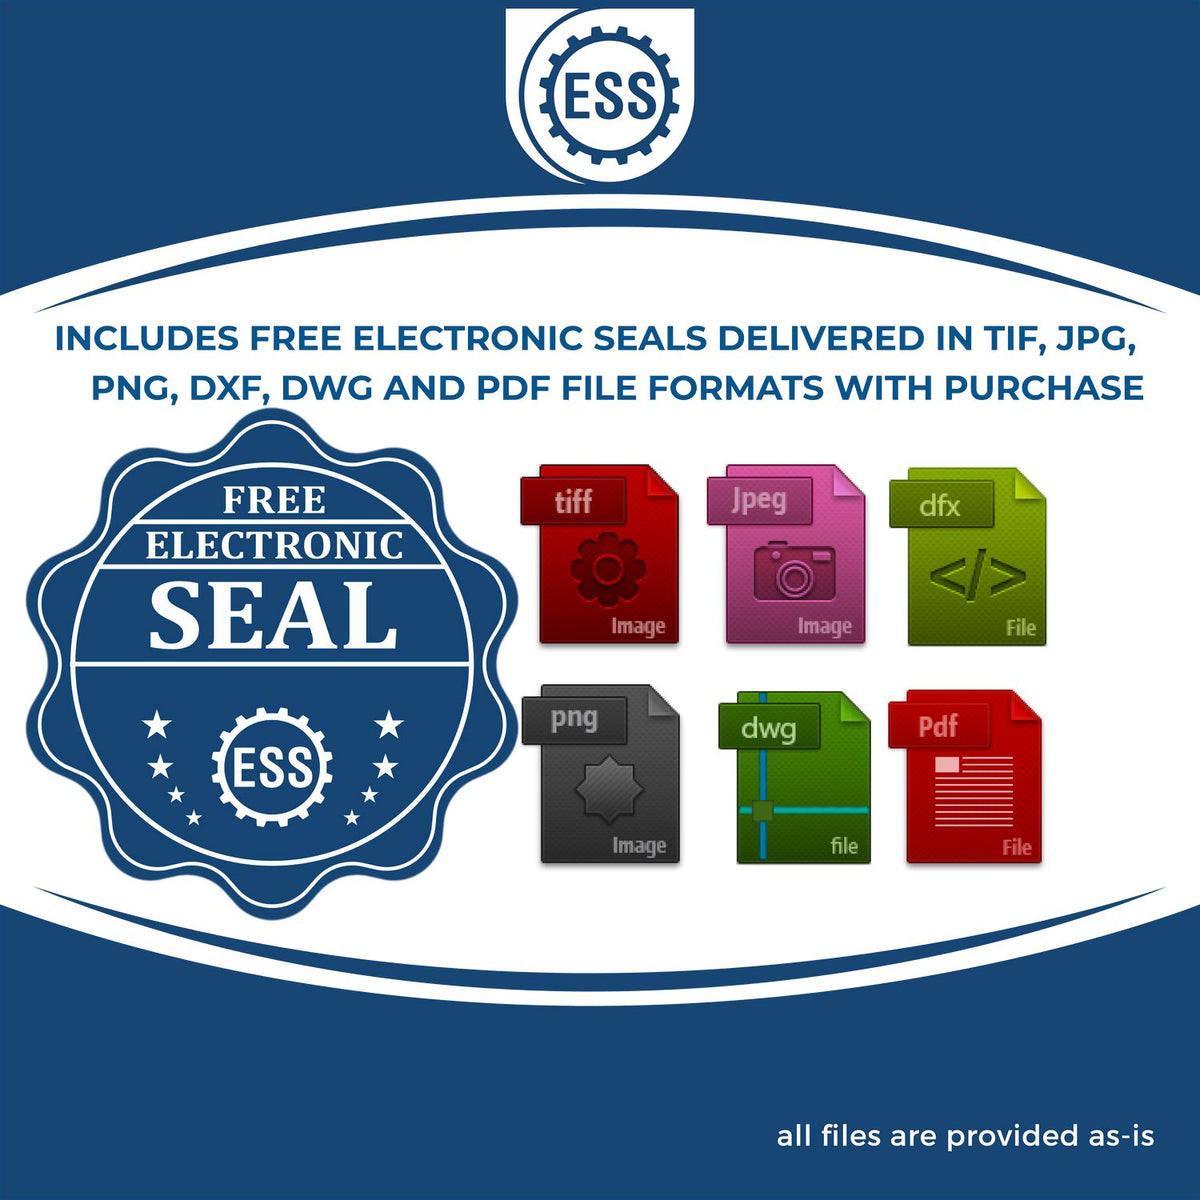 An infographic for the free electronic seal for the Heavy Duty Cast Iron Georgia Geologist Seal Embosser illustrating the different file type icons such as DXF, DWG, TIF, JPG and PNG.